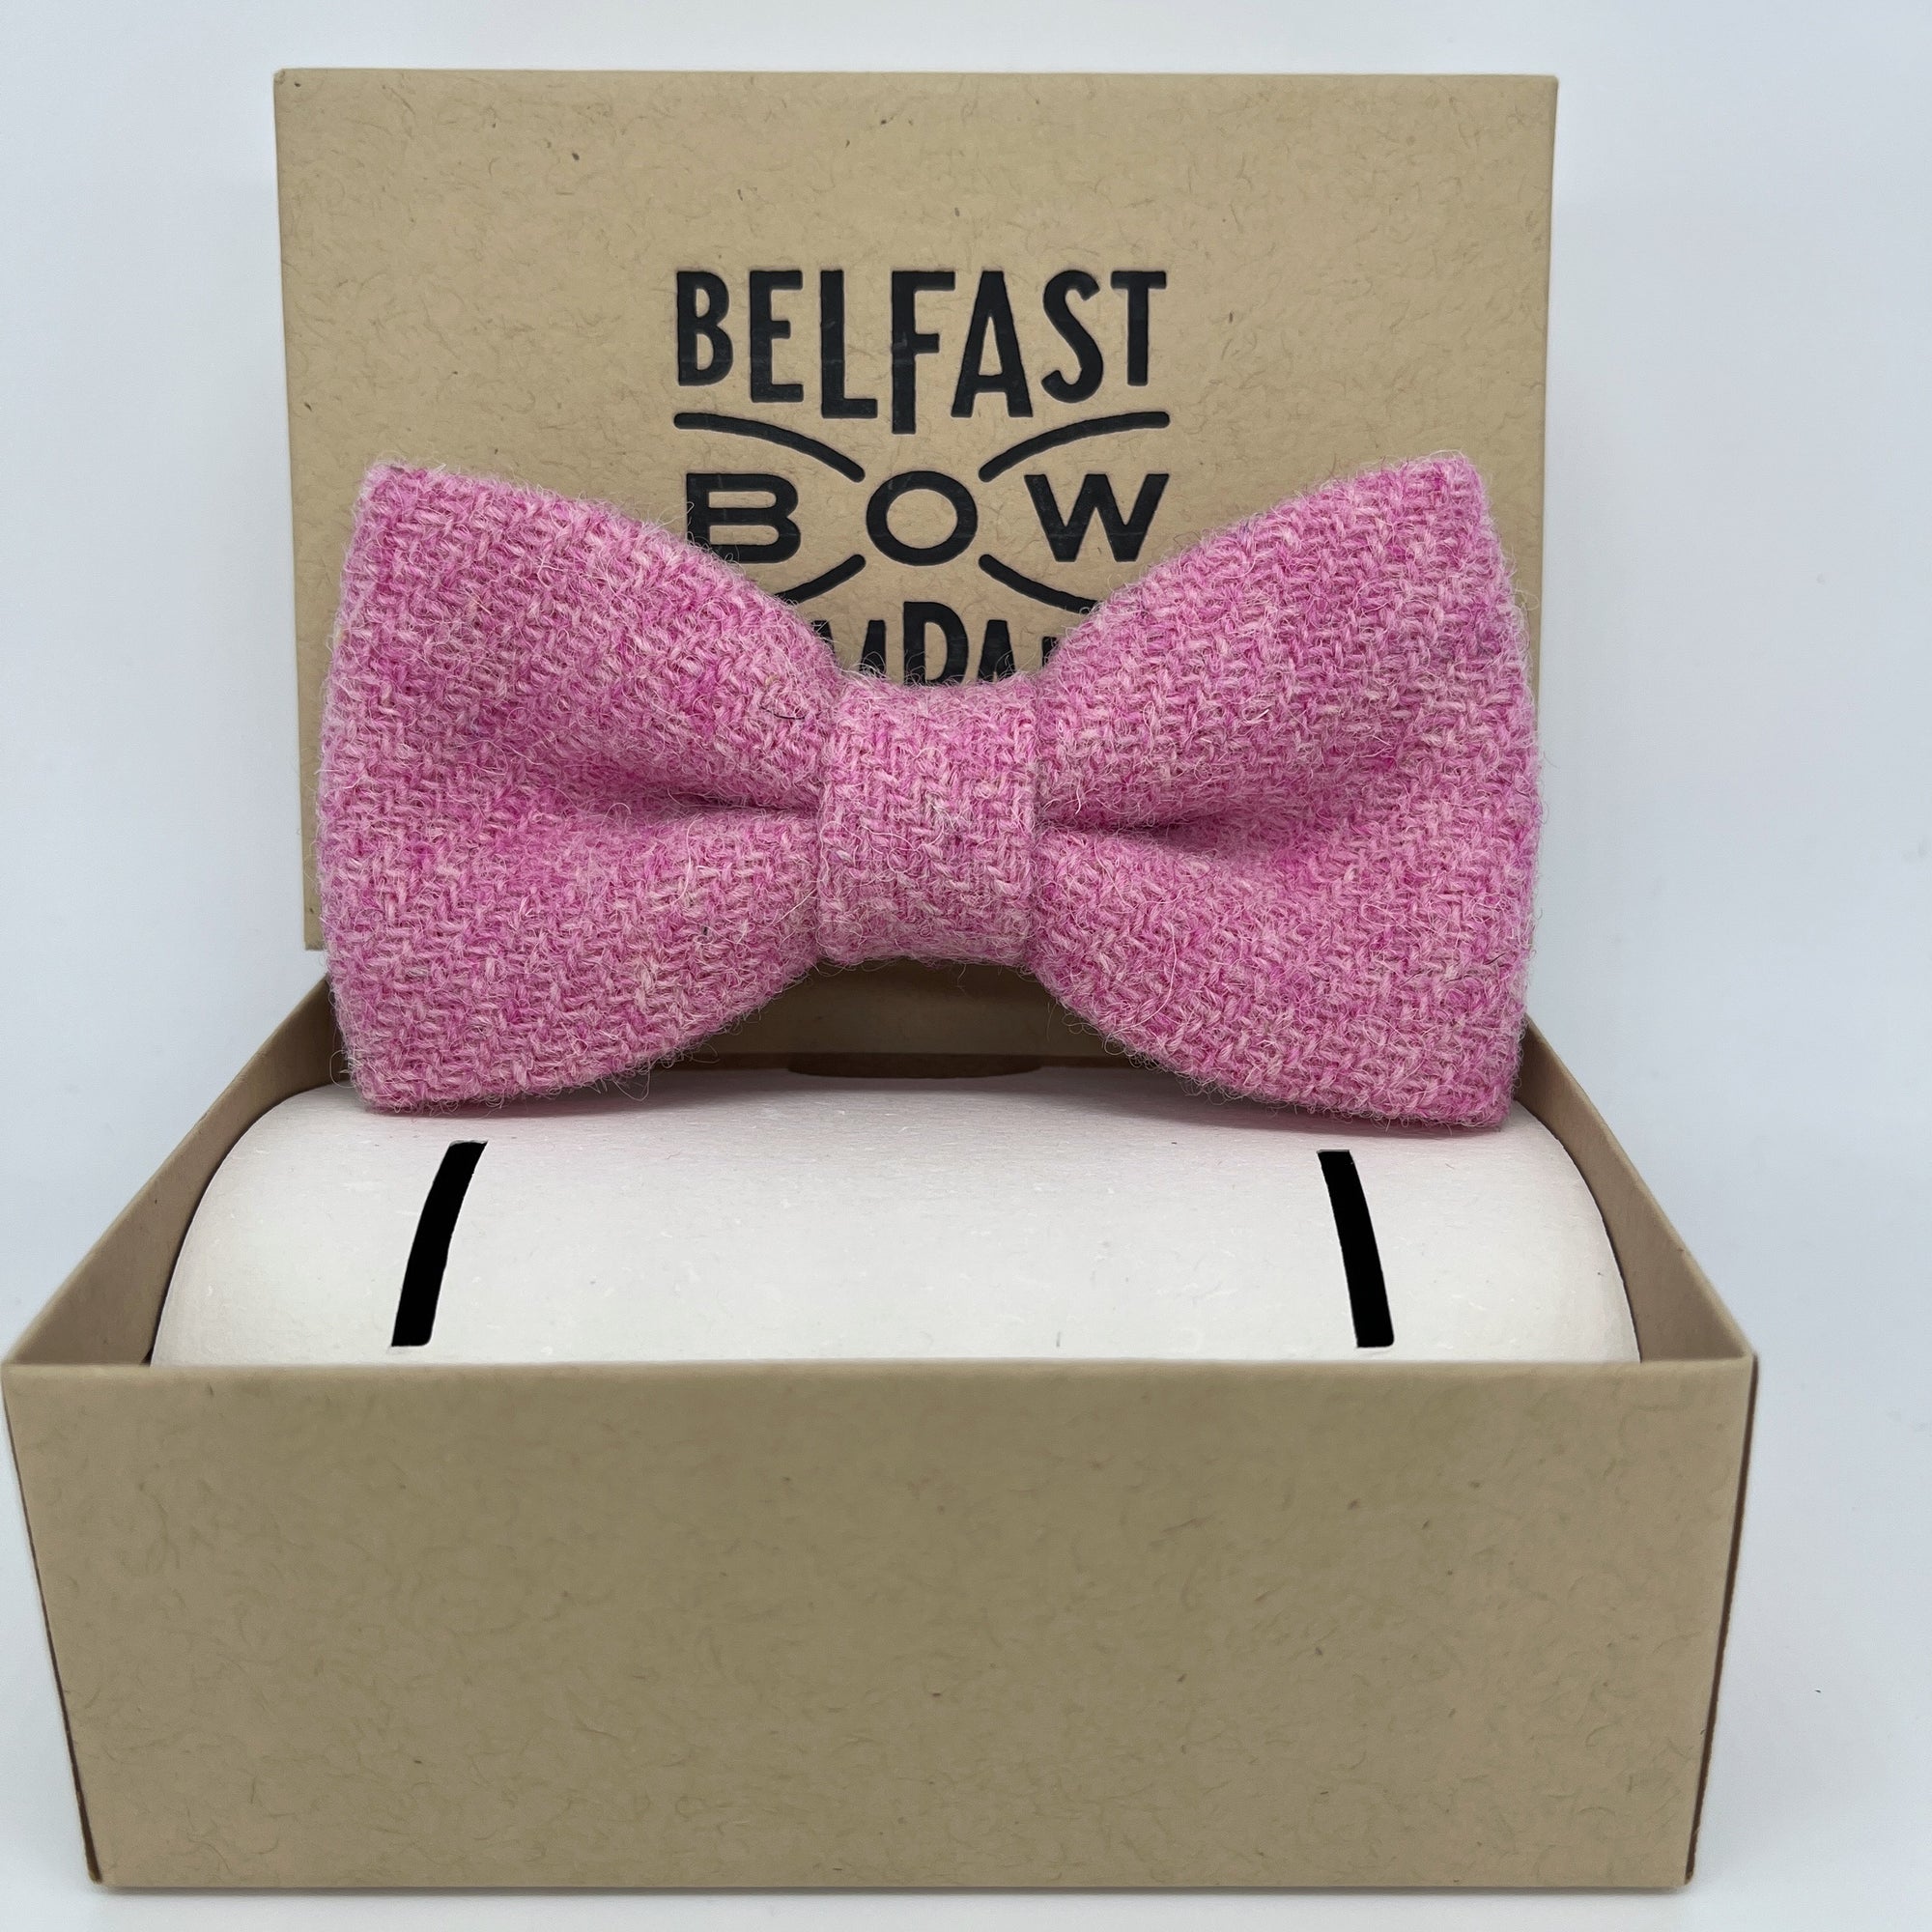 Harris Tweed Bow Tie in Pink by the Belfast Bow Company